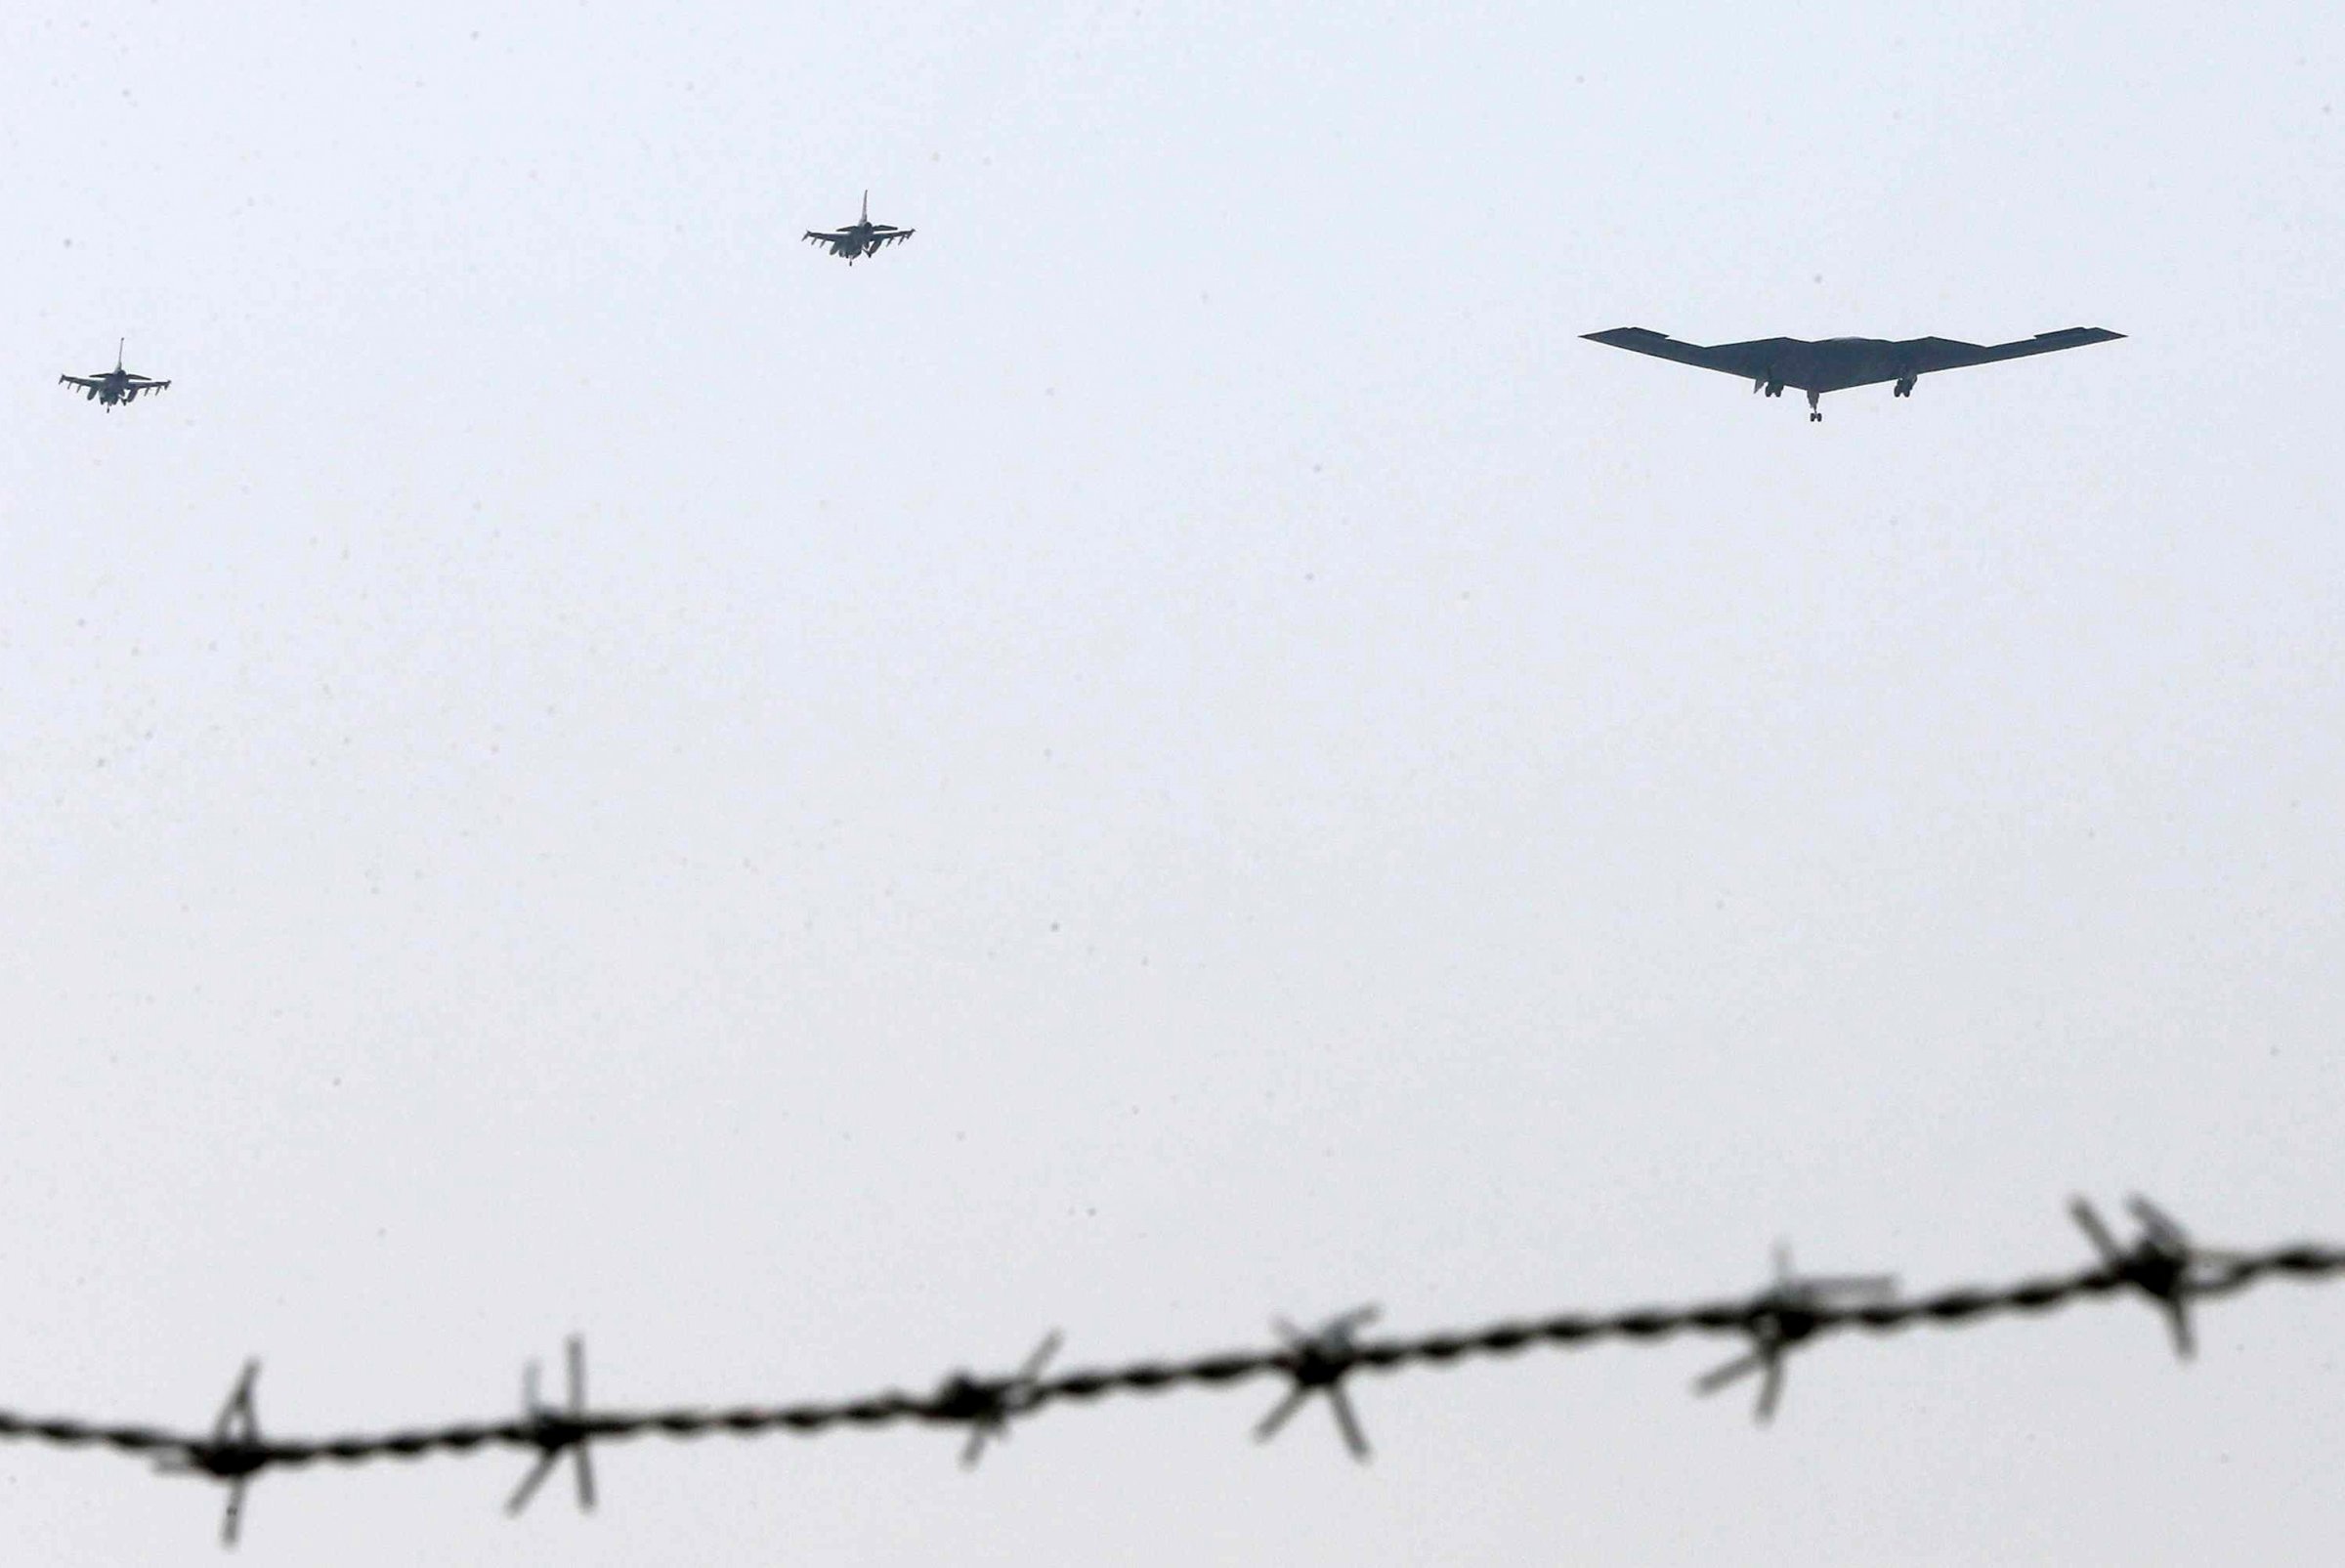 The United States air force's B-2 stealth bomber, center, flies over near the Osan U.S. Air Base in Pyeongtaek, south of Seoul, South Korea, Thursday, March 28, 2013. A day after shutting down a key military hotline, Pyongyang instead used indirect communications with Seoul to allow South Koreans to cross the heavily armed border and work at a factory complex that is the last major symbol of inter-Korean cooperation. (AP Photo/Shin Young-keun, Yonhap) KOREA OUT